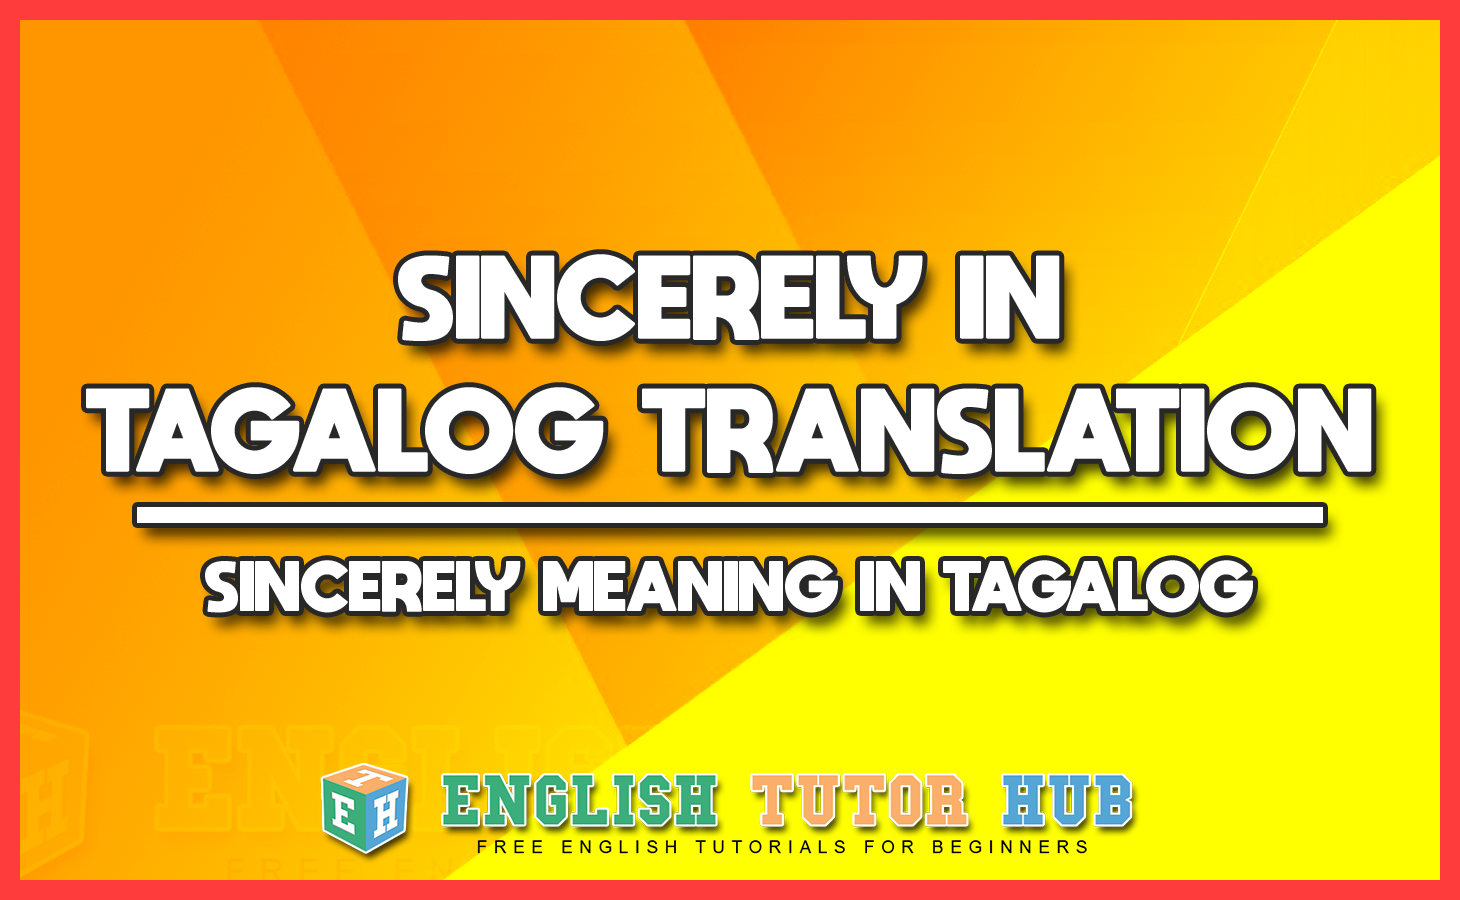 SINCERELY IN TAGALOG TRANSLATION - SINCERELY MEANING IN TAGALOG